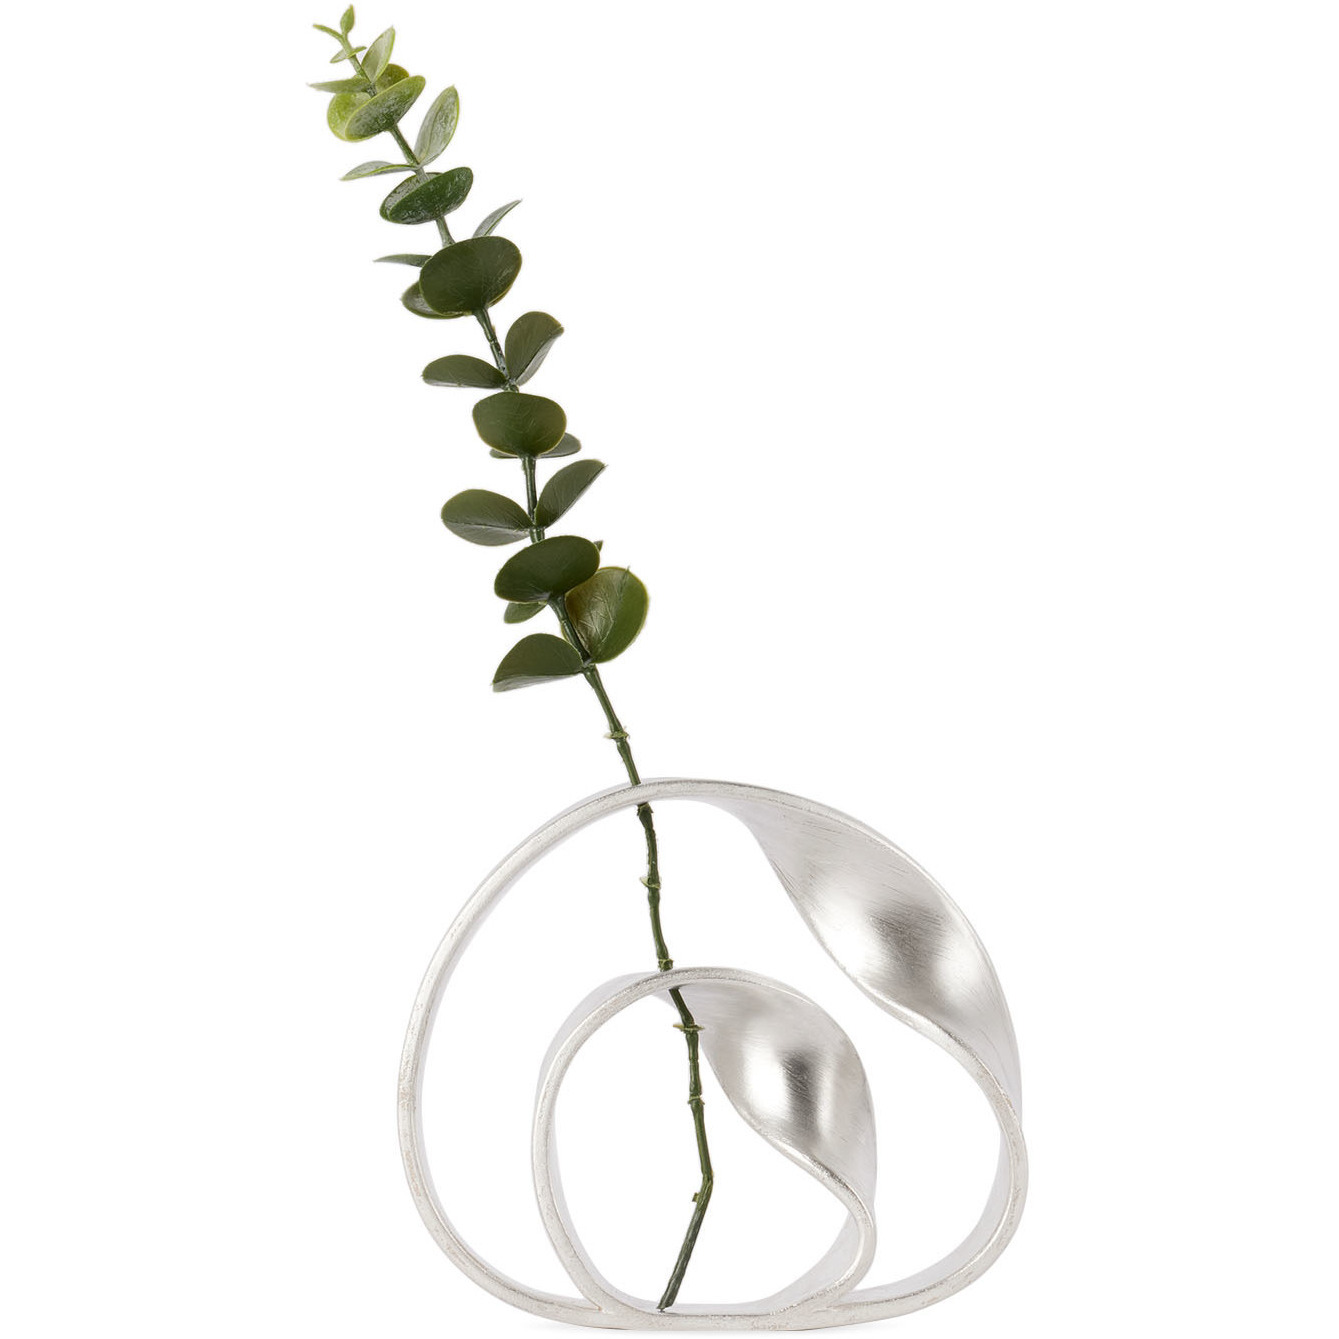 Slorence SSENSE Exclusive Silver Group E Ring Vase - image 1